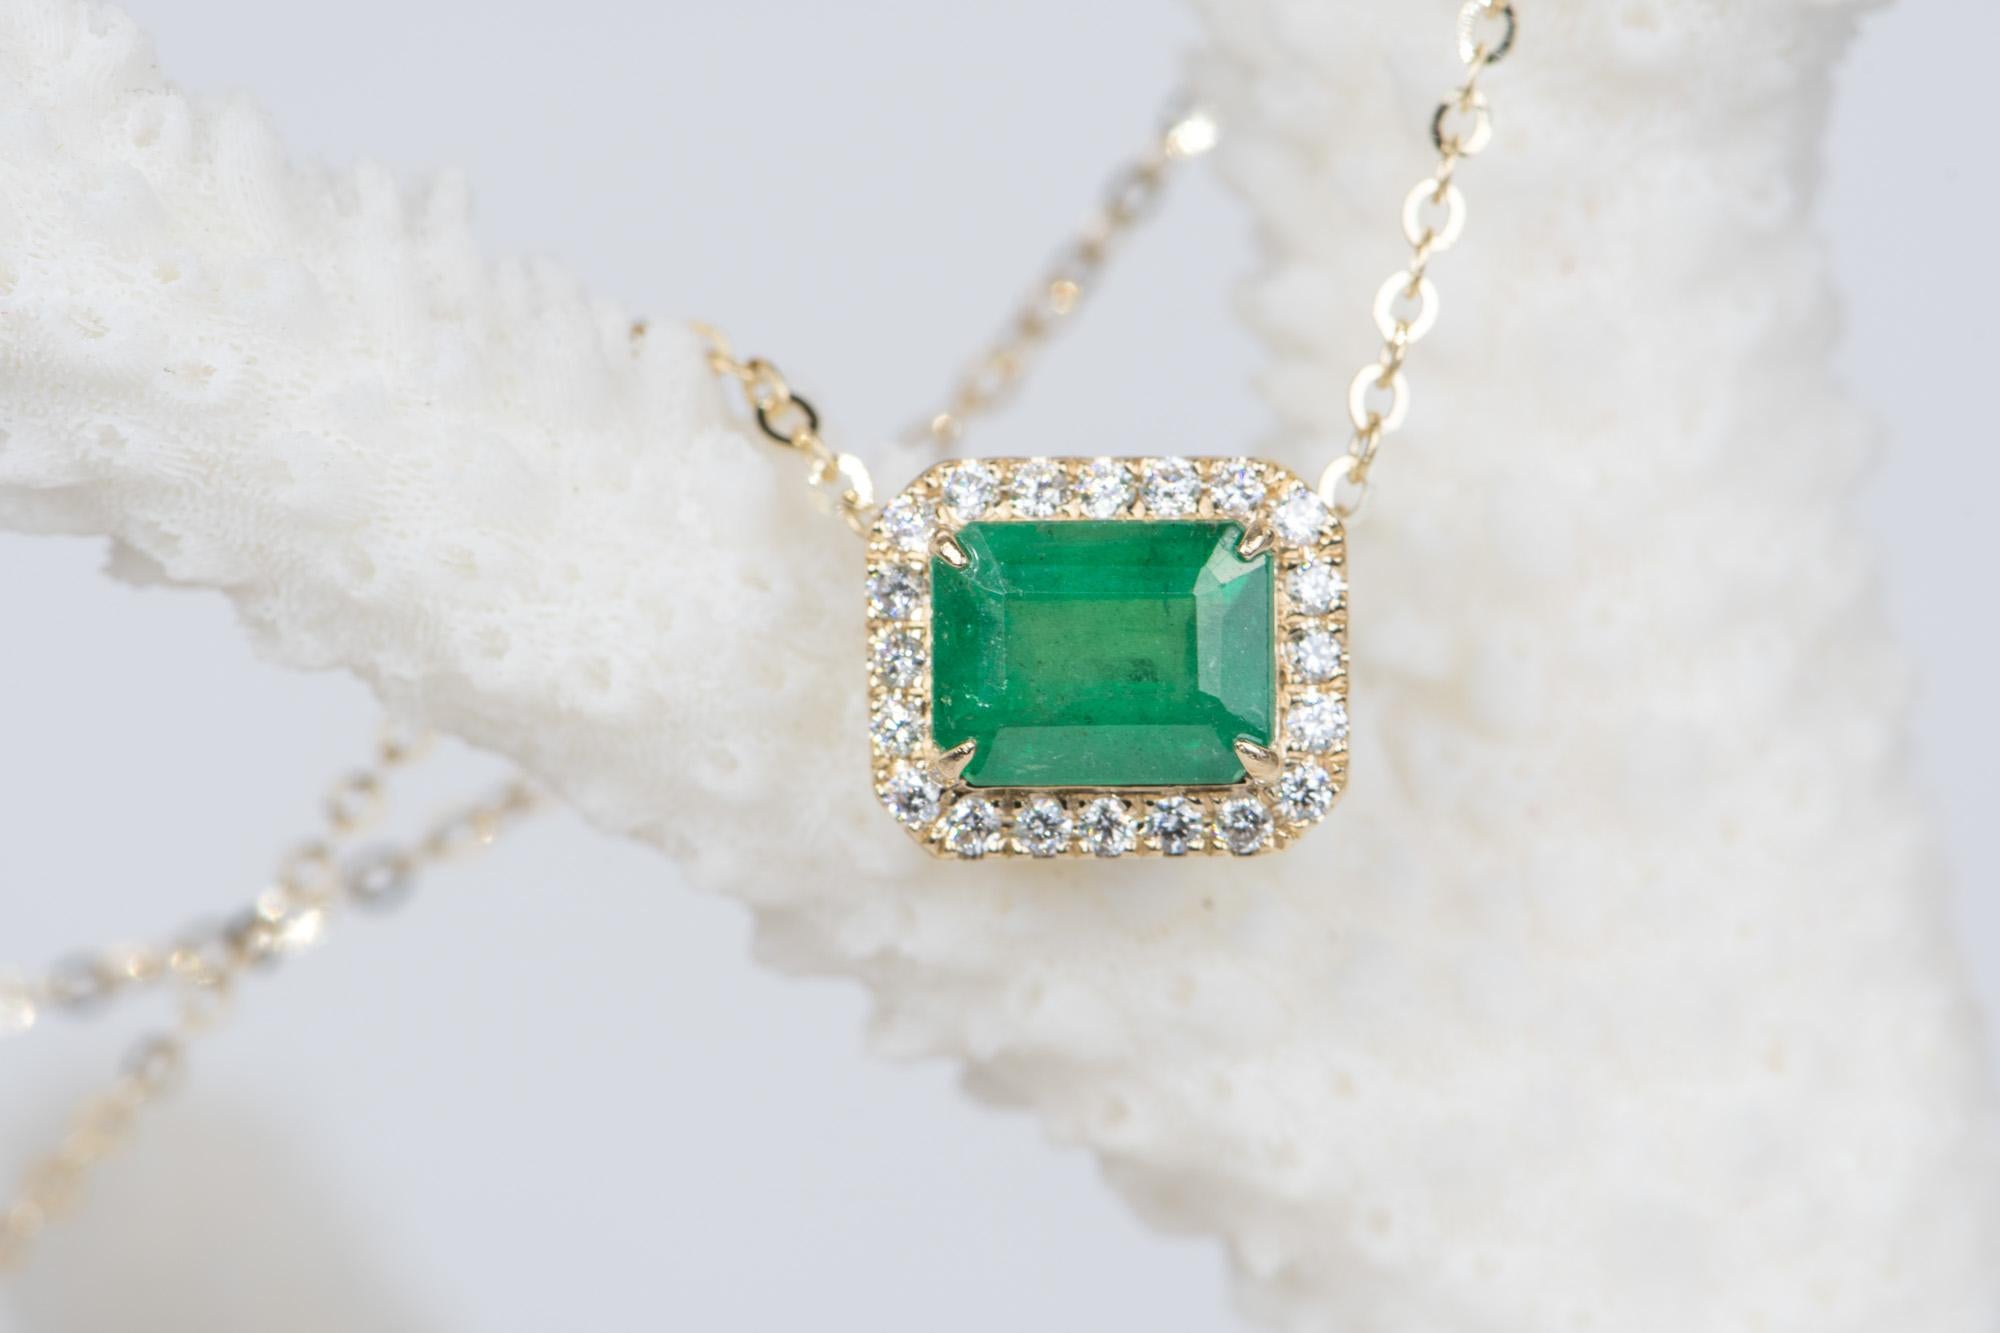 ♥  A solid 14K yellow gold necklace featuring a stunning emerald in the center, flanked by a halo of sparkling diamonds
♥  The overall setting measures 9.05mm in width, 10.8mm in length, and sits 6.9mm tall
♥  This pendant is great for layering or